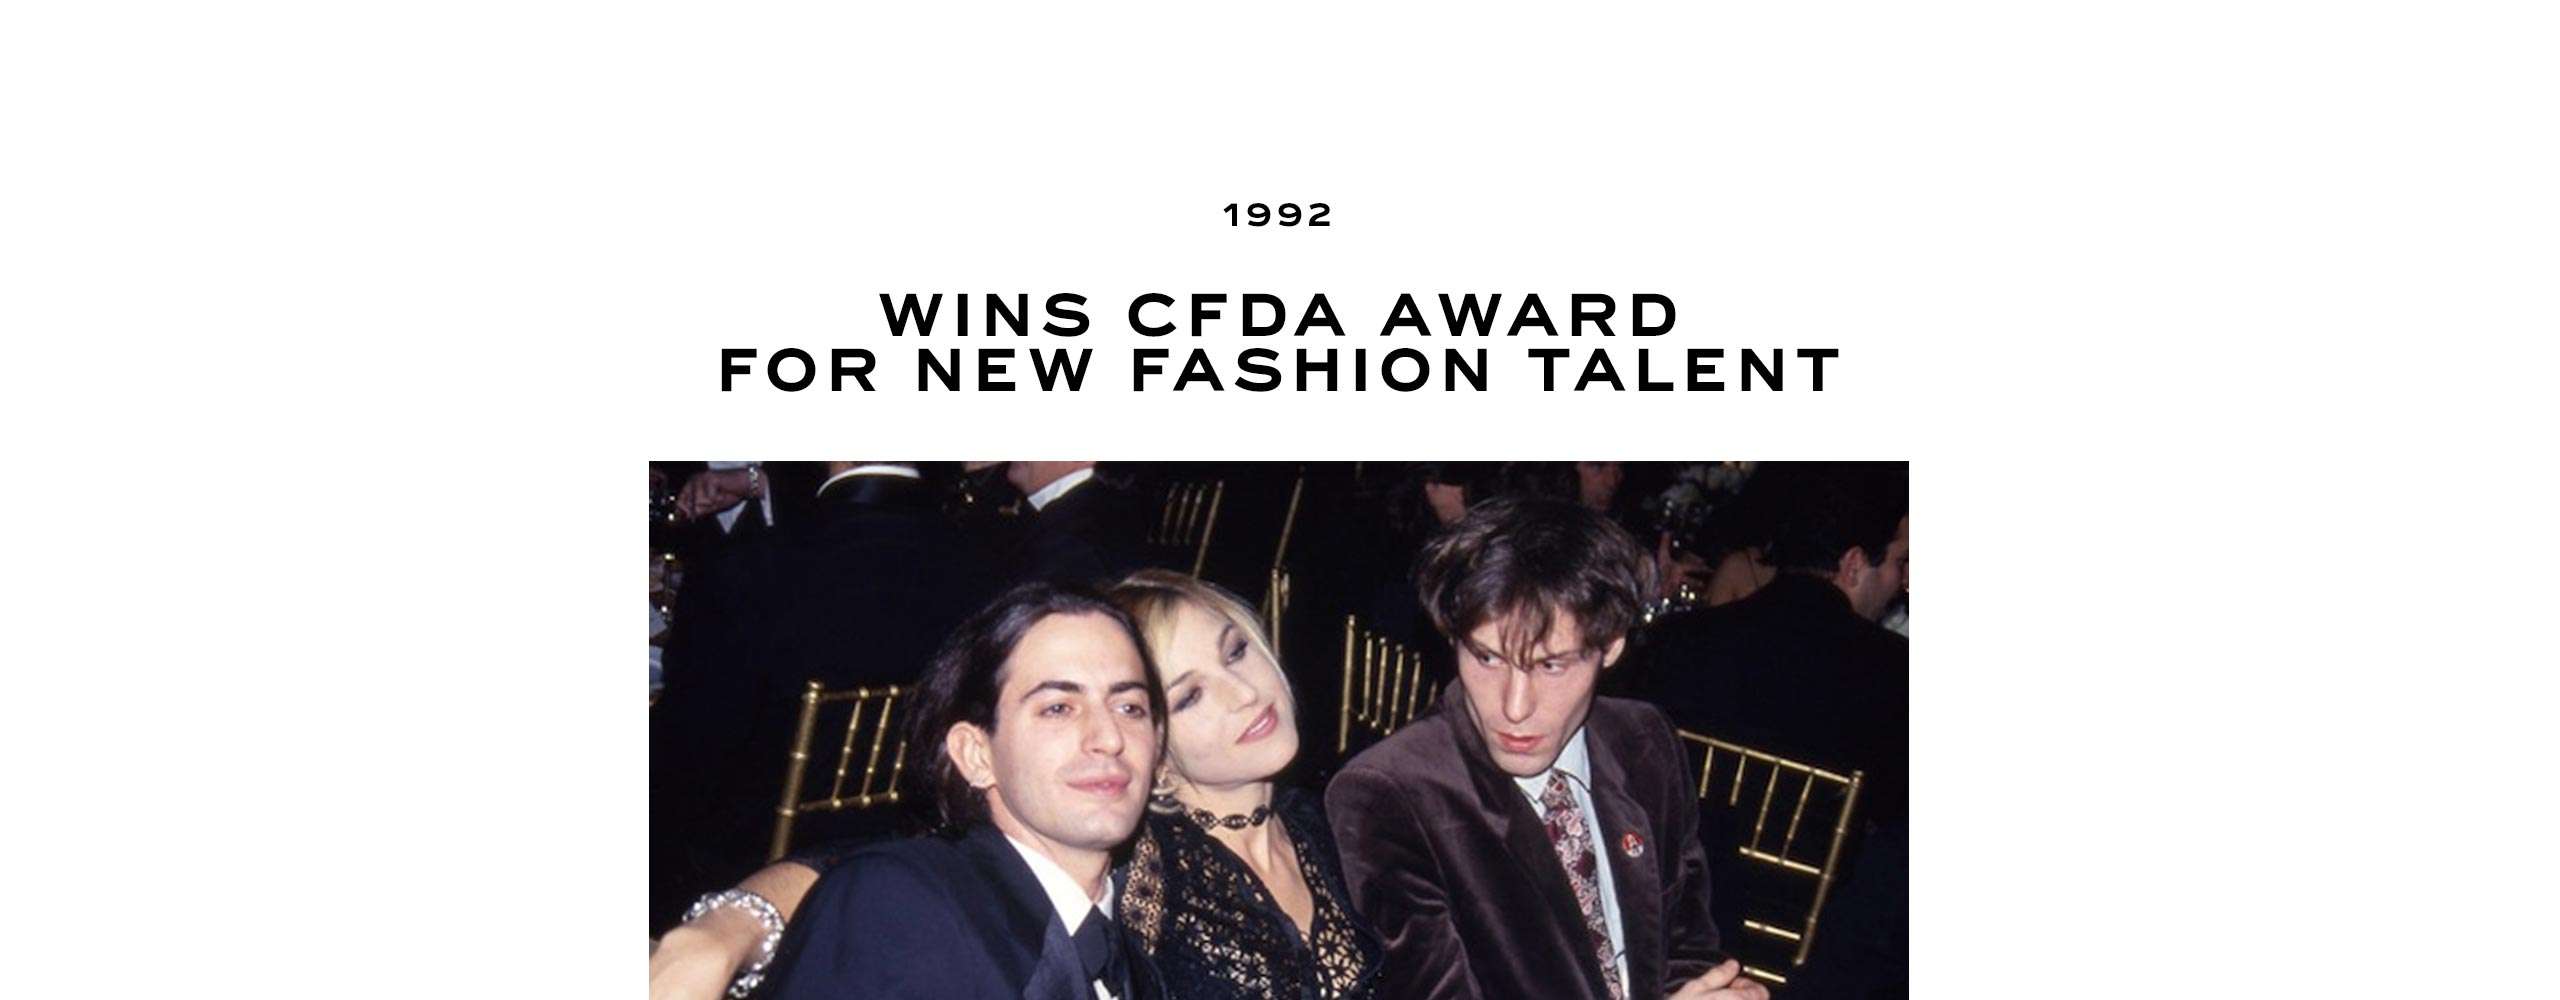 1992: Wins CFDA Award for new fashion talent.